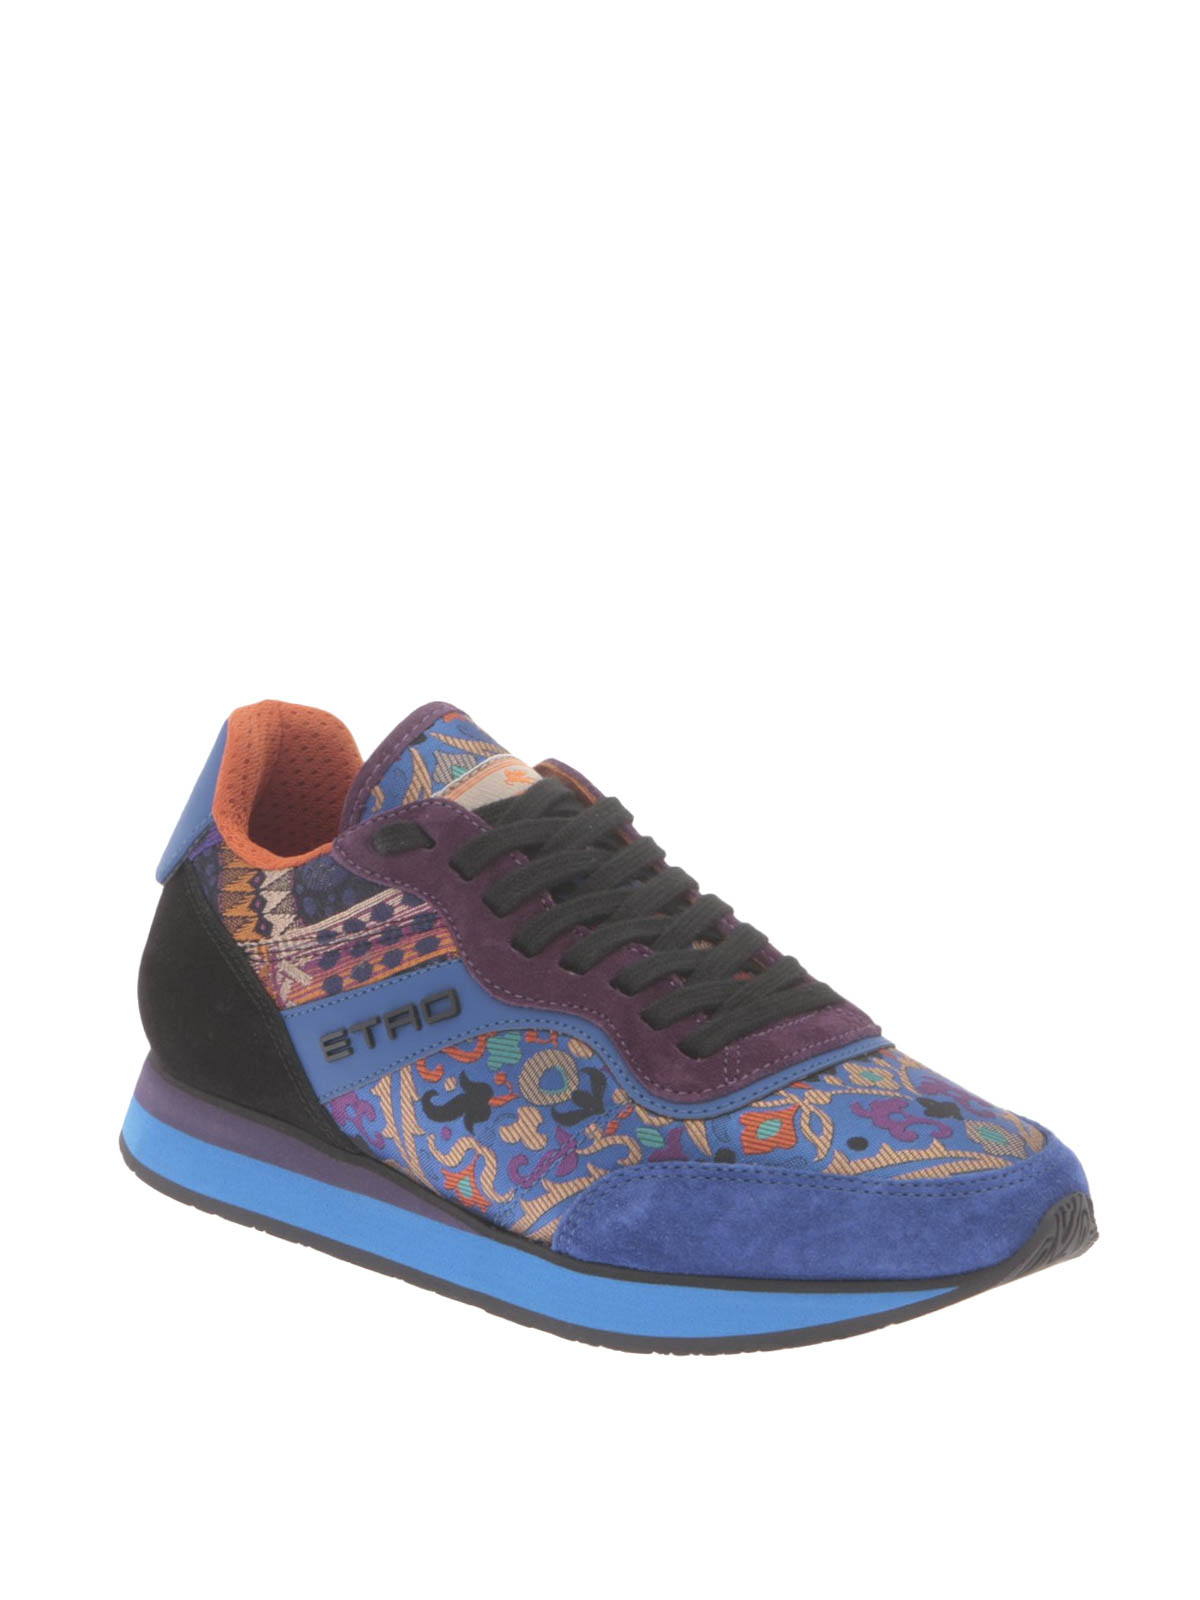 Trainers Etro - Jacquard paisley and - 1204726280001